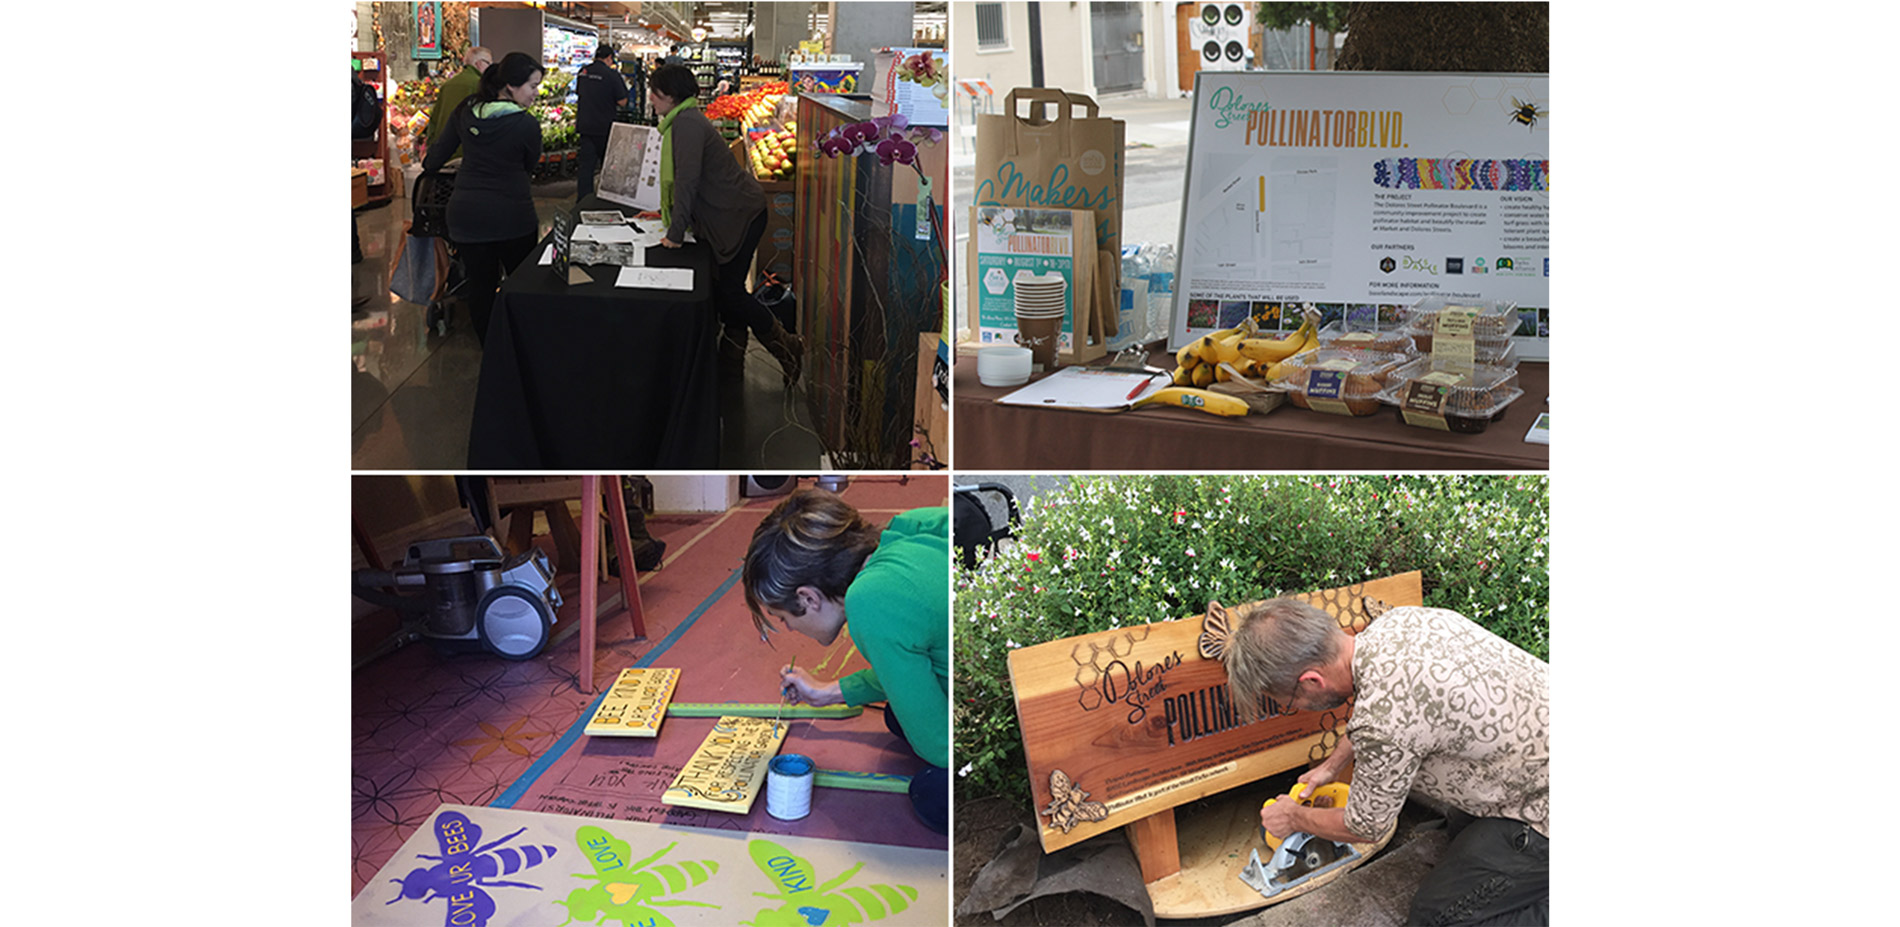 We partnered with local businesses and civic agencies to nurture the project and set up tabling sessions to garner public interest and feedback. Commu…